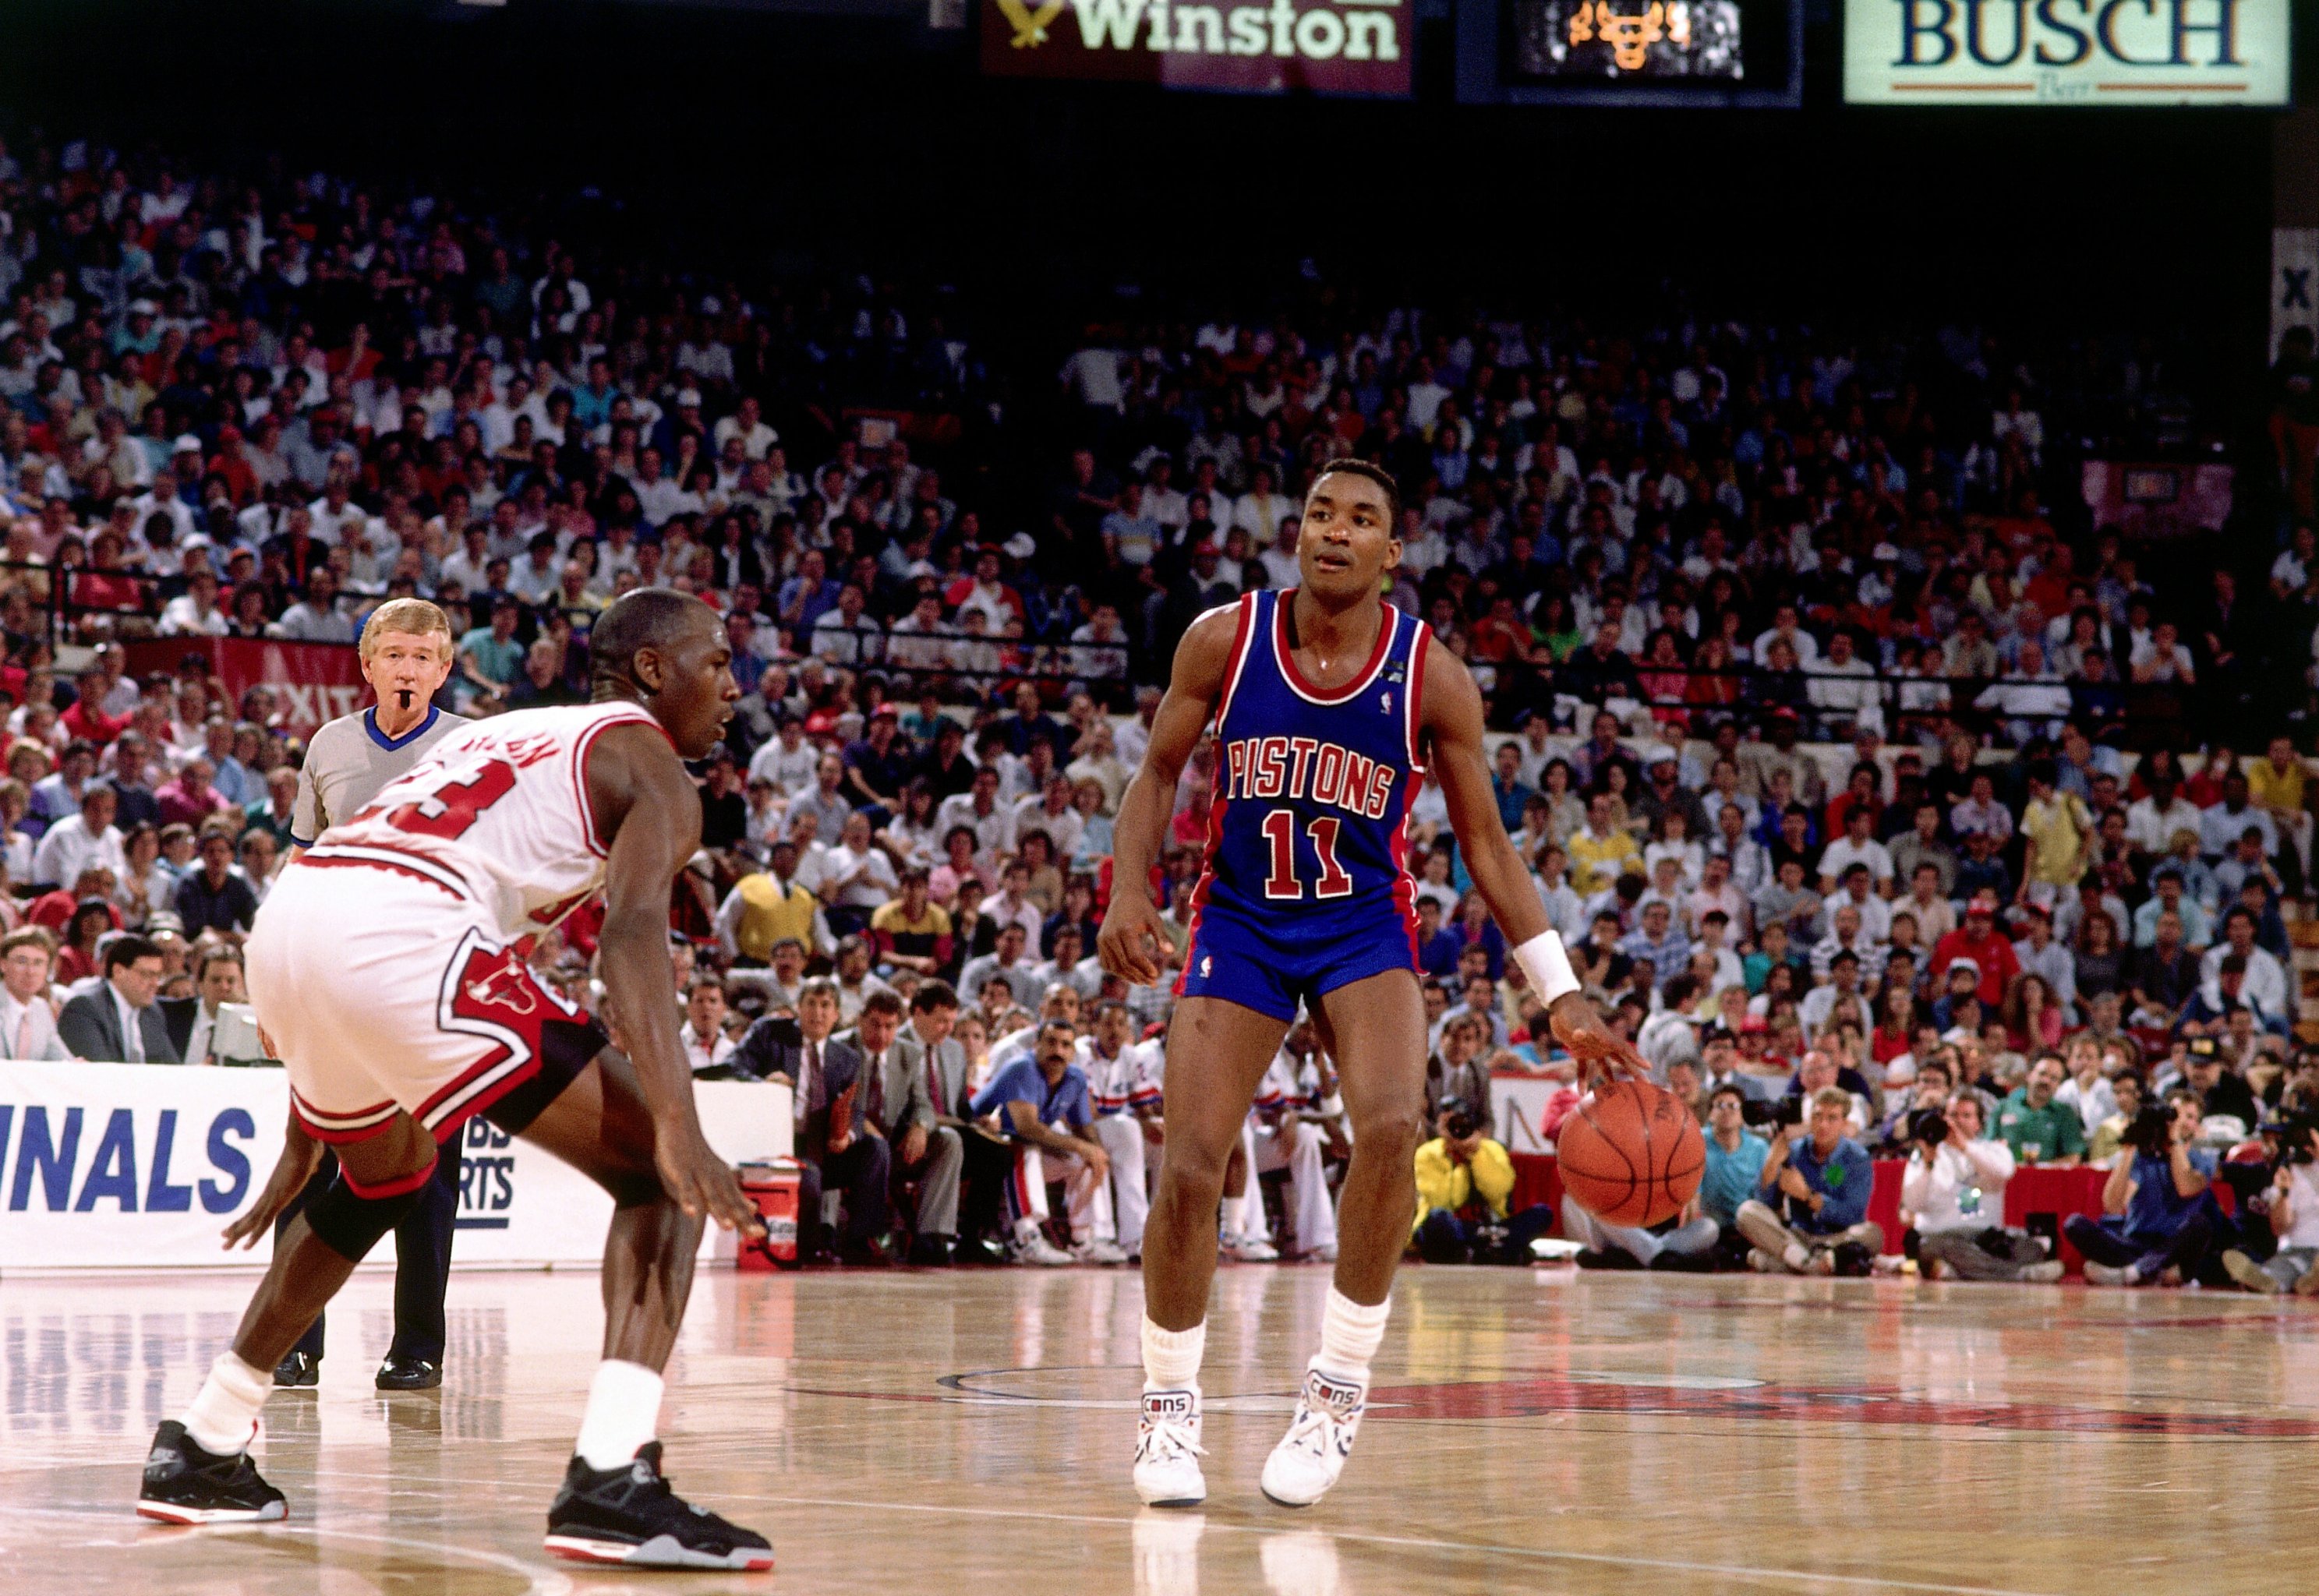 Pippen and Bulls first had to beat Detroit's Bad Boys